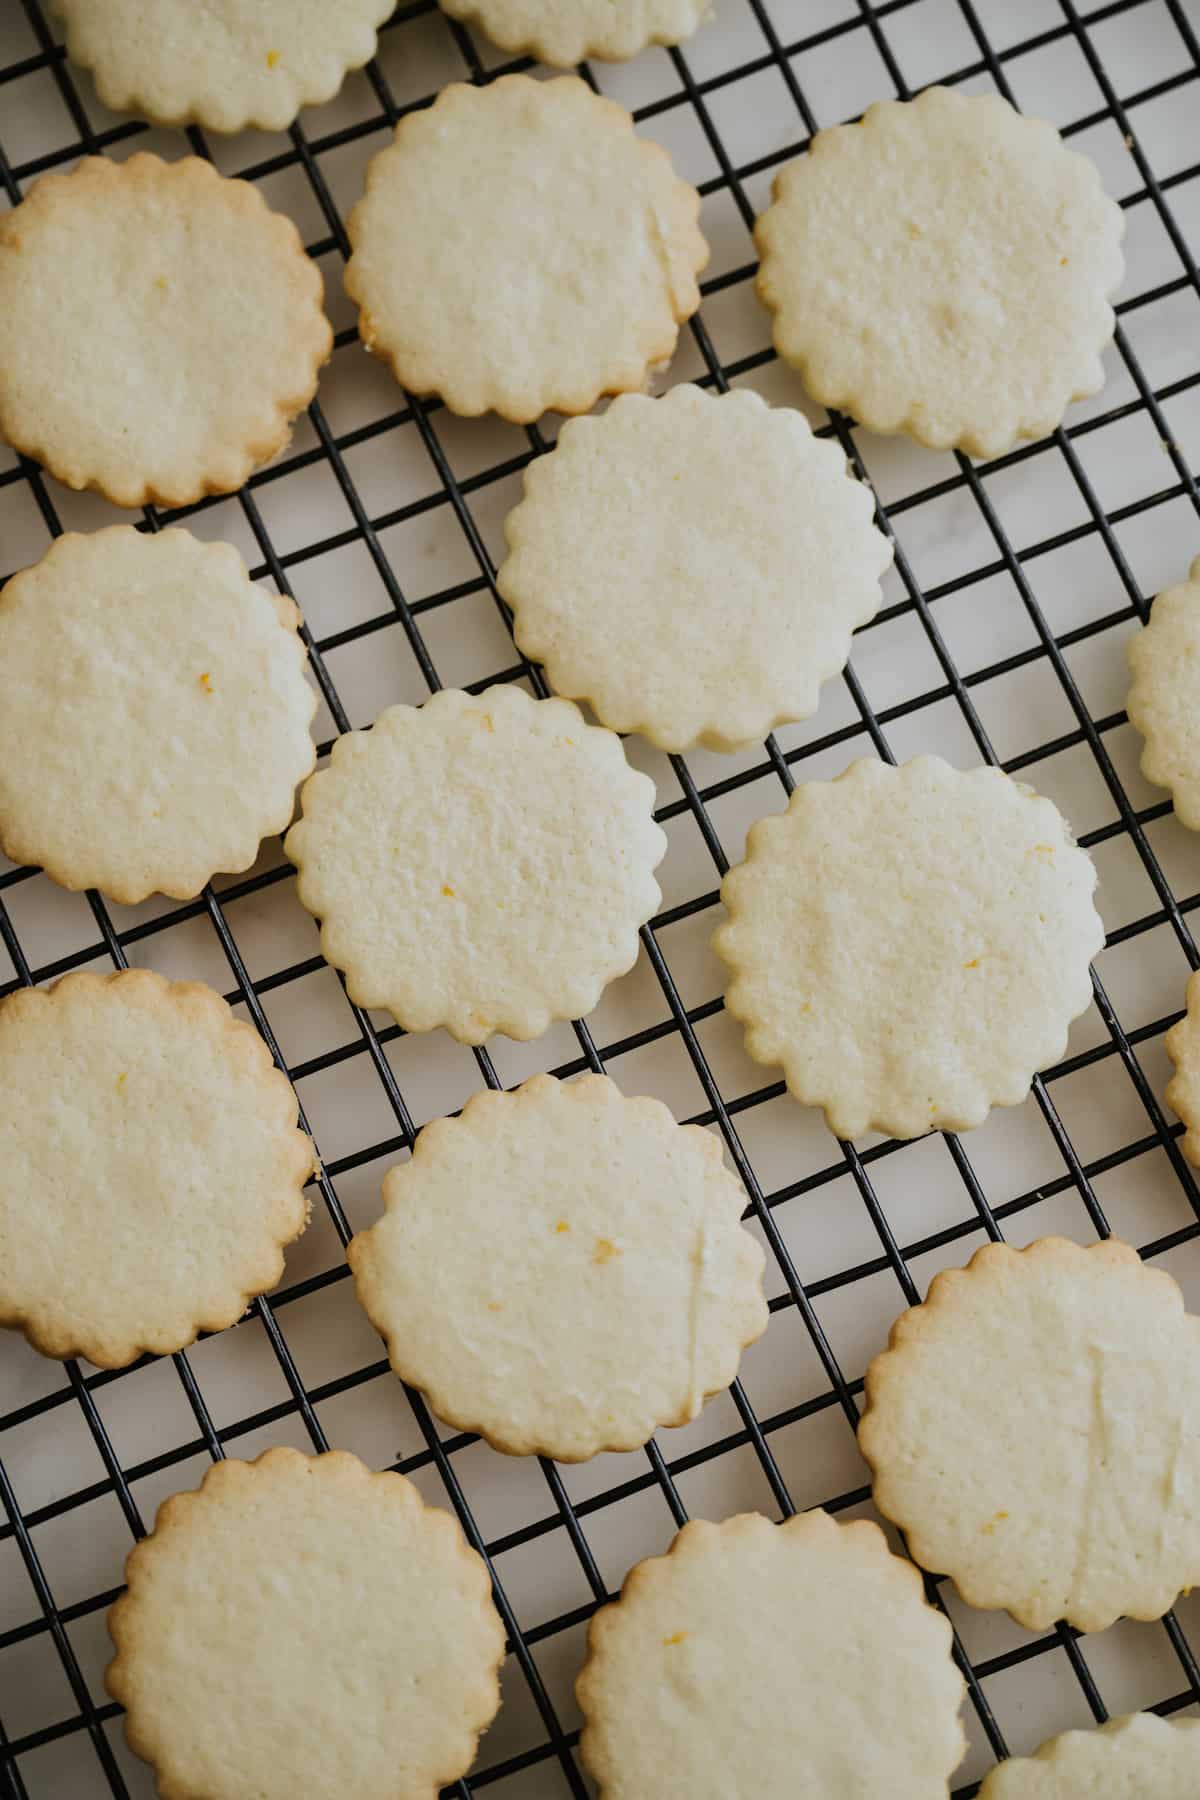 baked and unfilled shortbread cookies cooling on a rack before filling with dulce de leche for making alfajores de maicena.